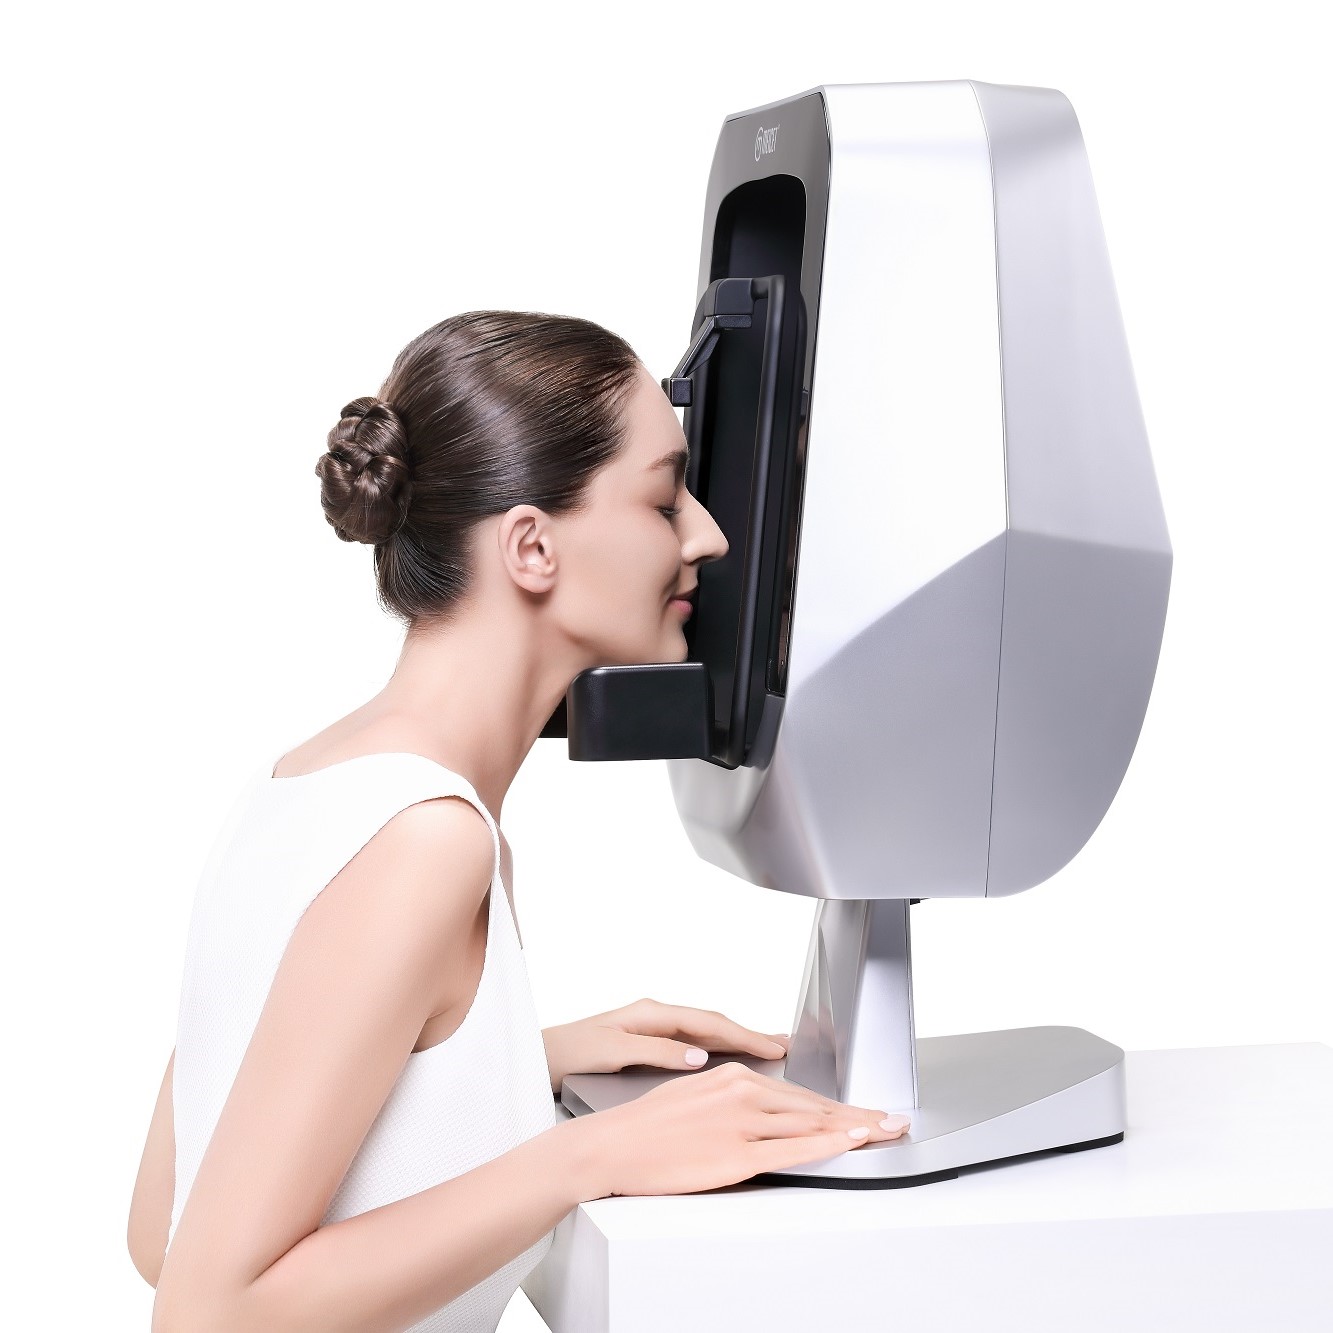 Meicet 3D Full Facial Skin Analyzer Commercial Use MC88 Image Featured